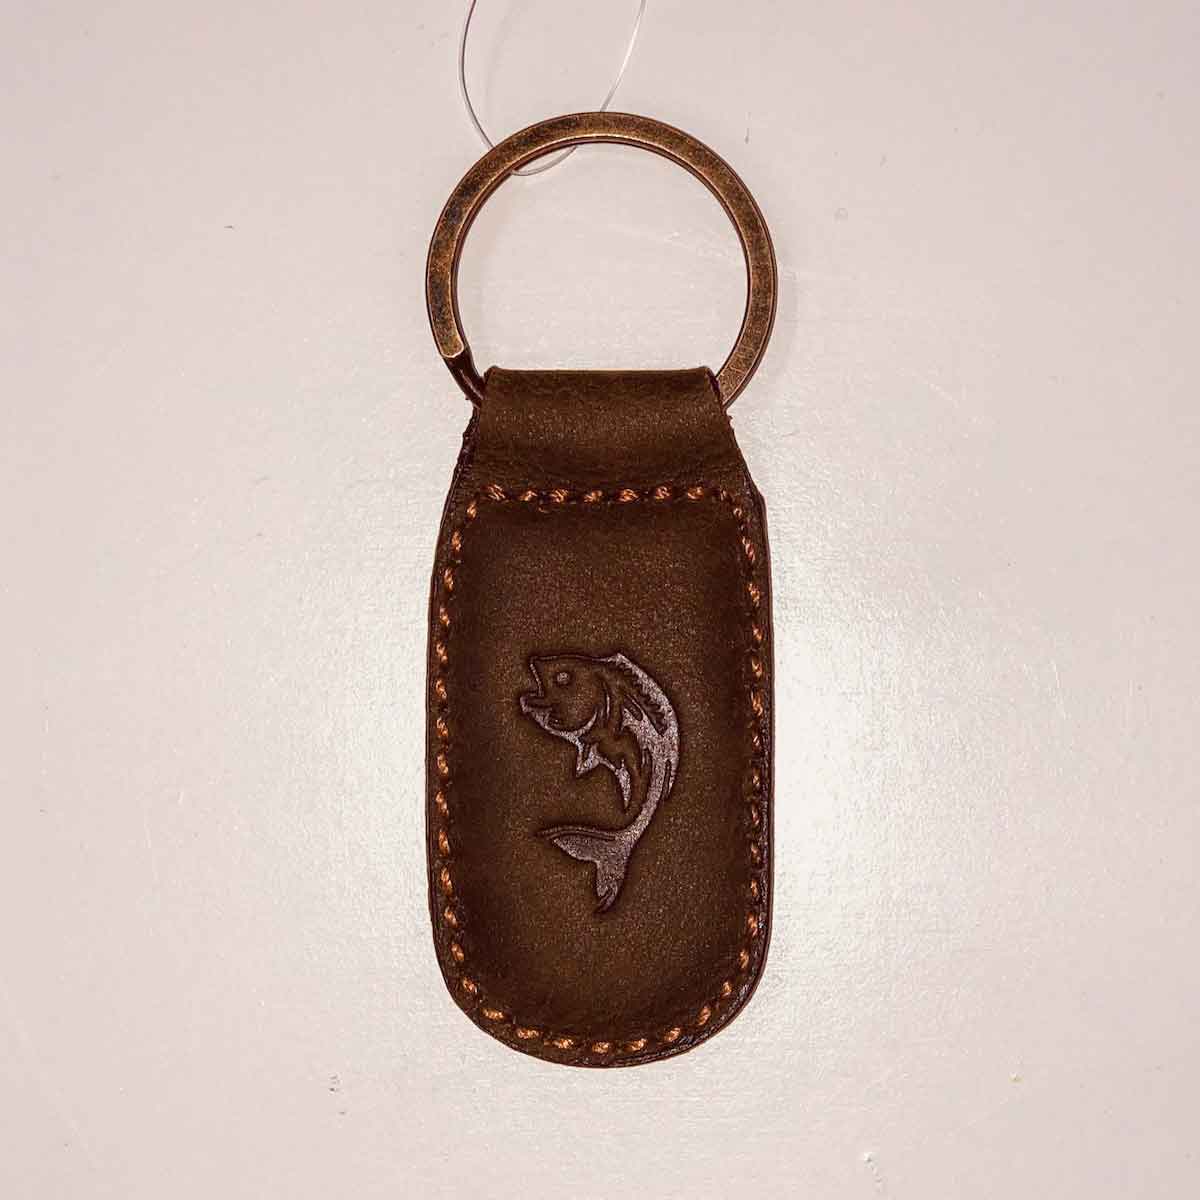 A Fish Leather Embossed Keychain from The Royal Standard.